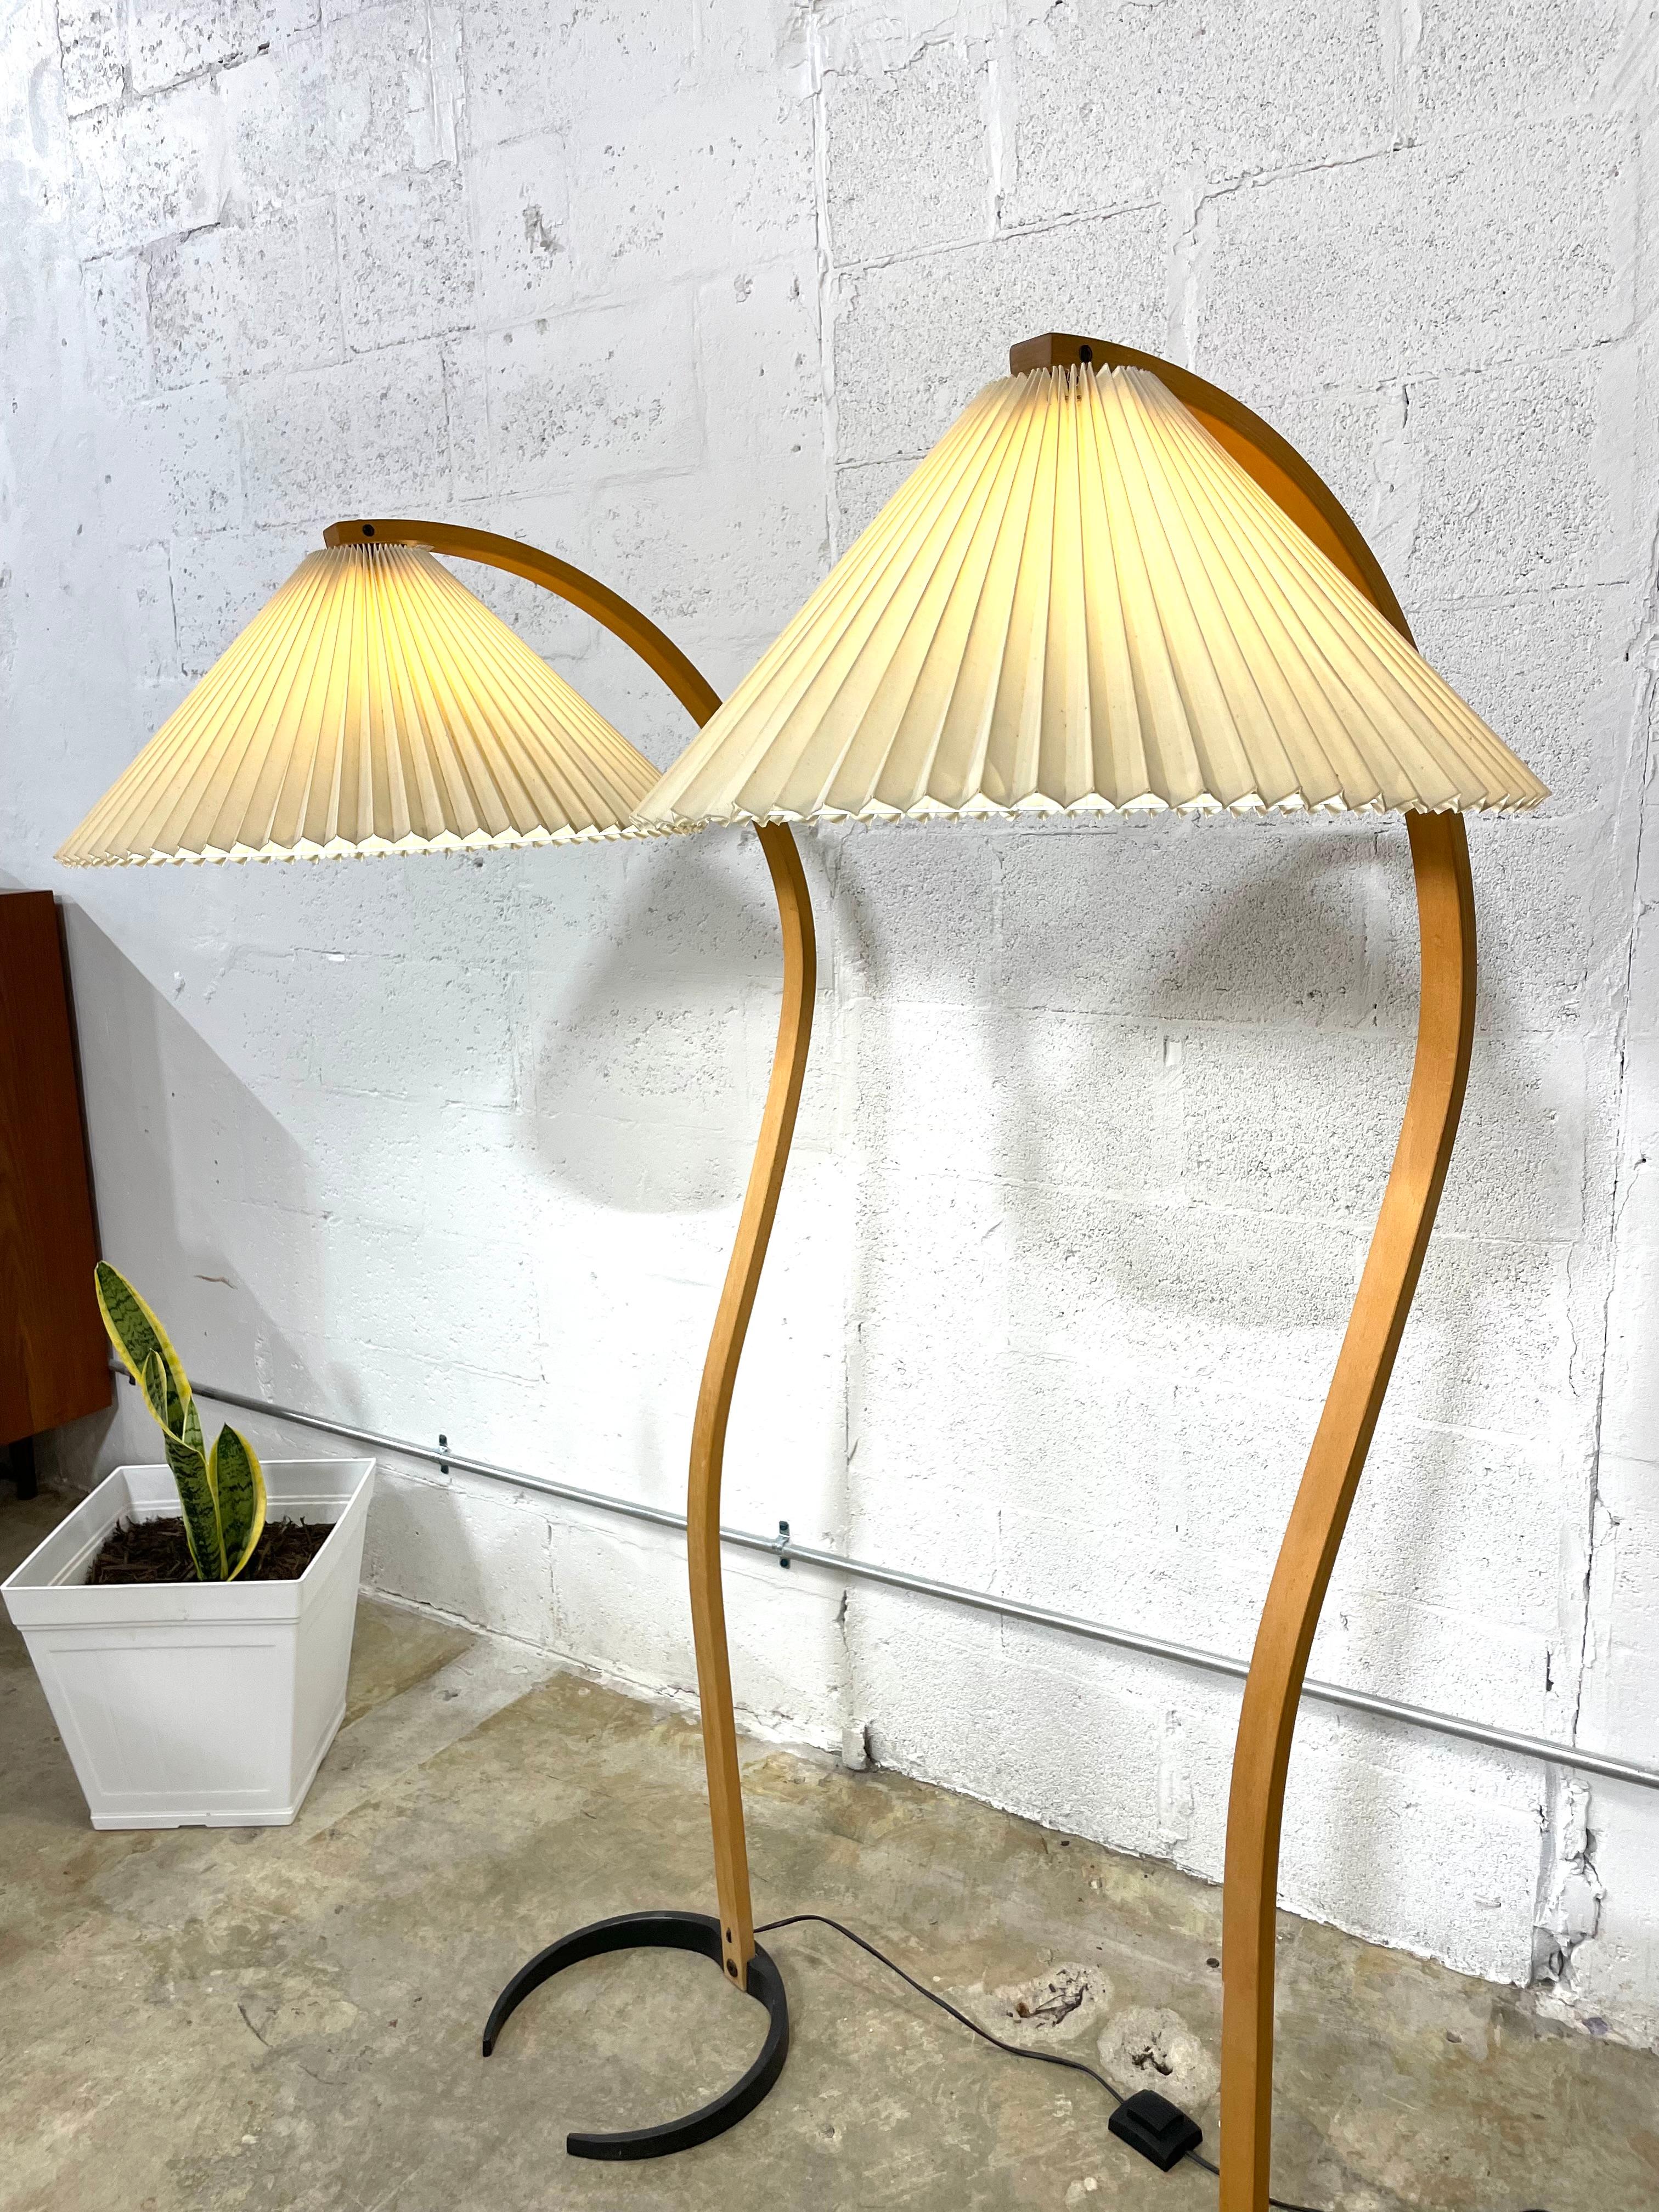 Authentic Mads Caprani Floor Lamps. 2 available. Curved bentwood on a cast-iron crescent foot. The style is called Timberline no. 840 in beech wood. Converter plug is included (last pic)